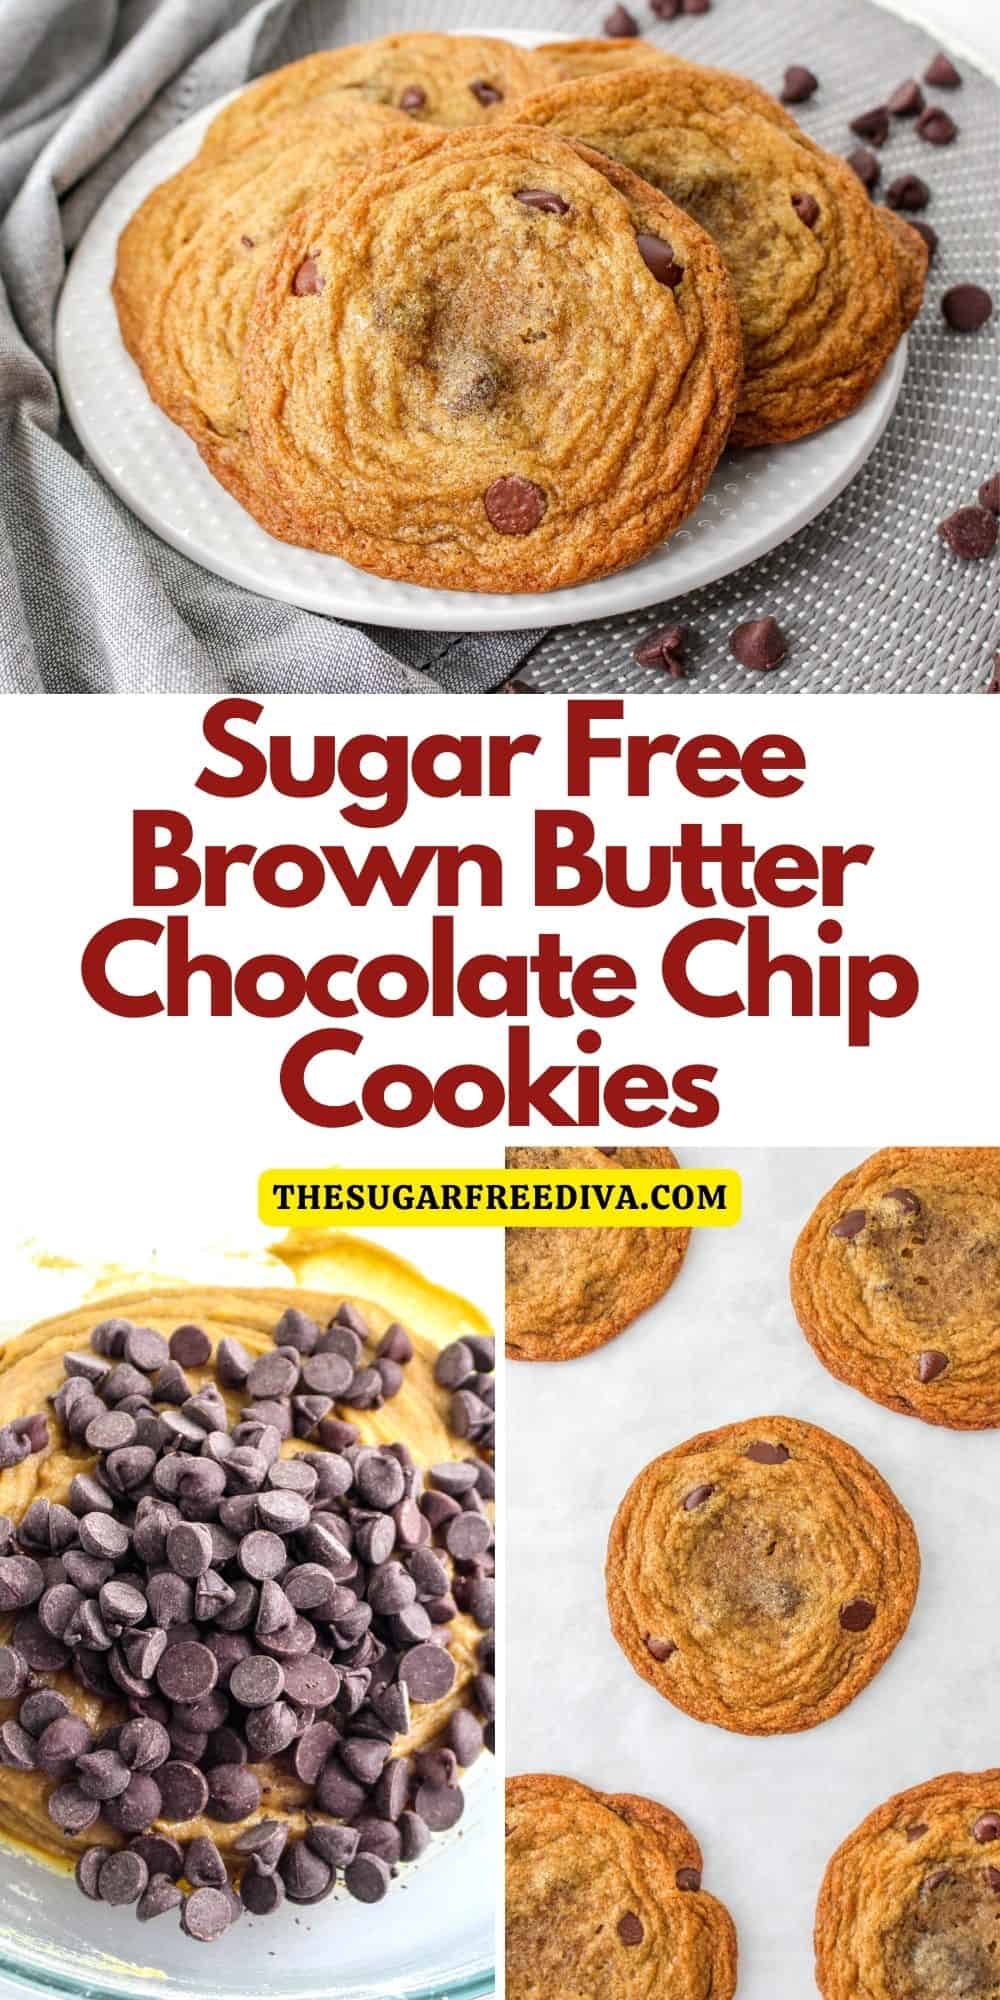 Sugar Free Brown Butter Chocolate Chip Cookies. A delicious recipe for flavorful soft and gooey cookies that have no added sugar.